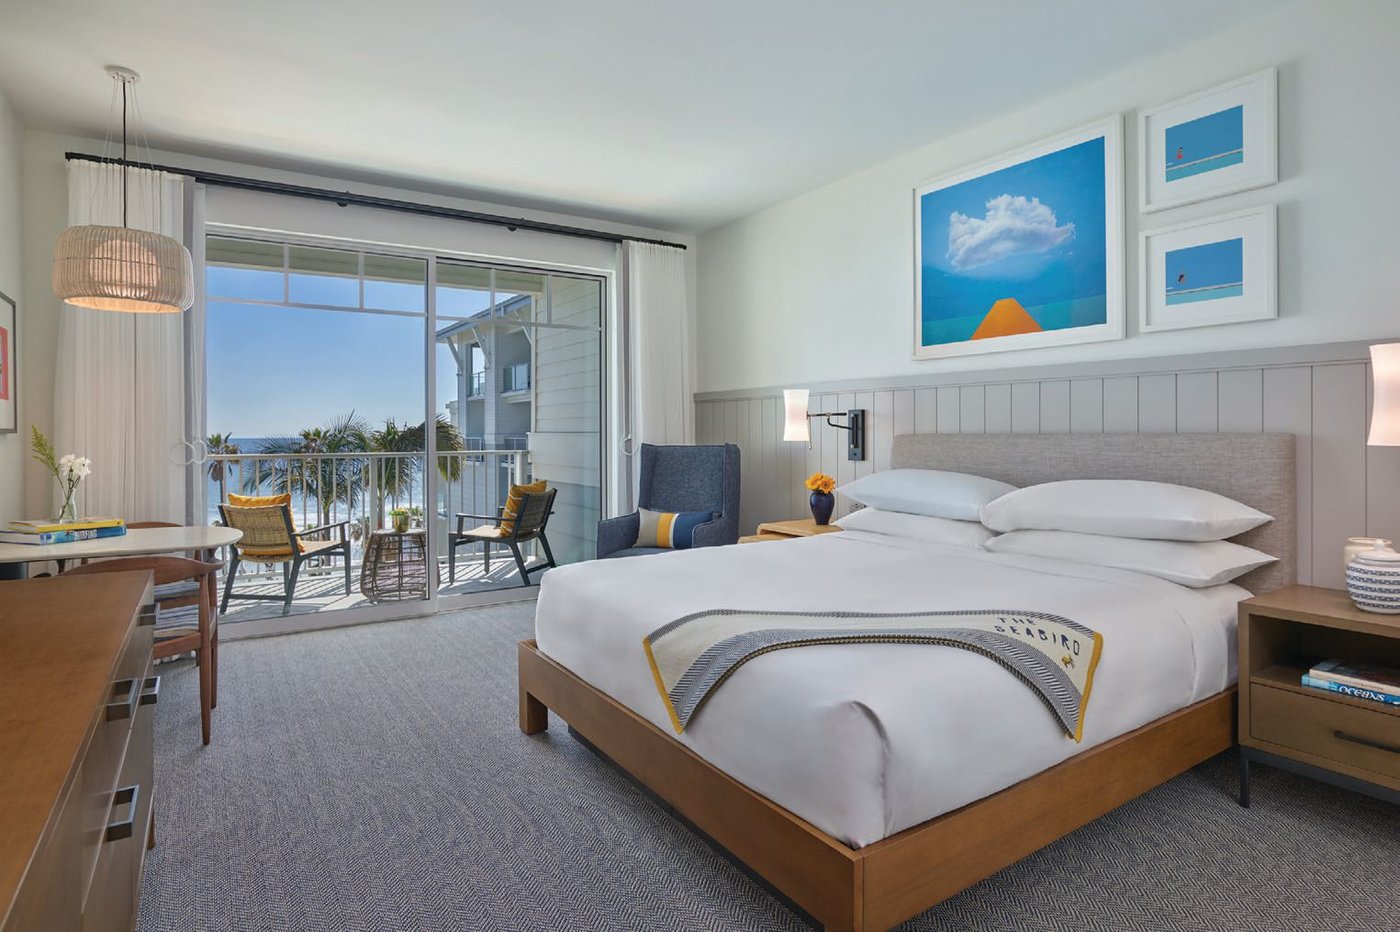 An ocean-view king room at The Seabird Resort. PHOTO COURTESY OF: THE SEABIRD RESORT